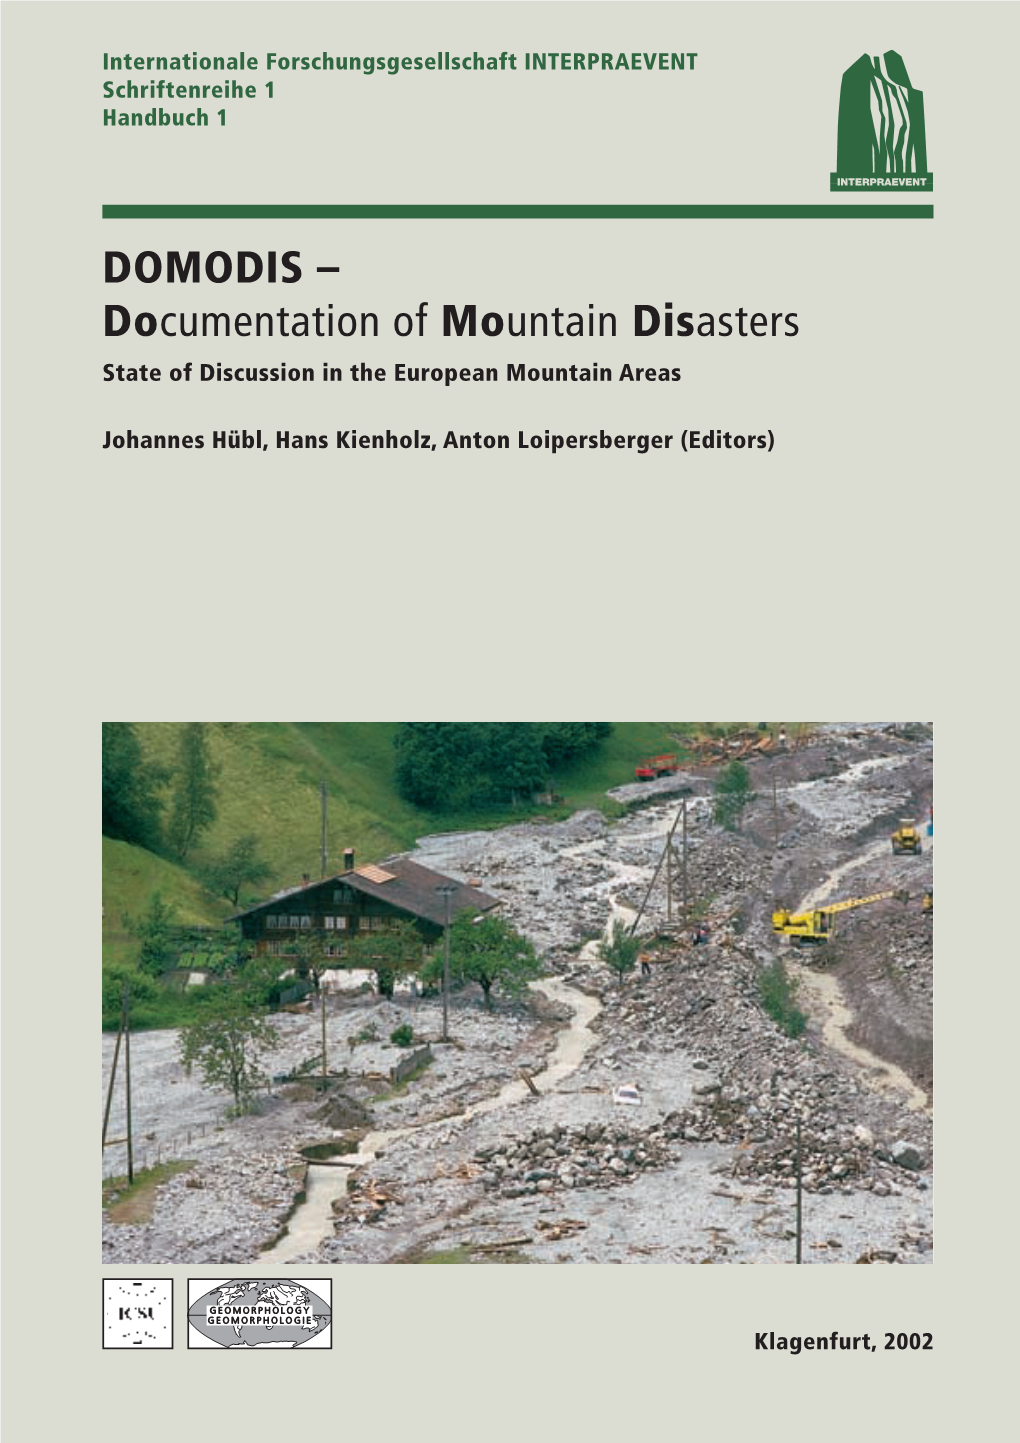 DOMODIS – Documentation of Mountain Disasters State of Discussion in the European Mountain Areas